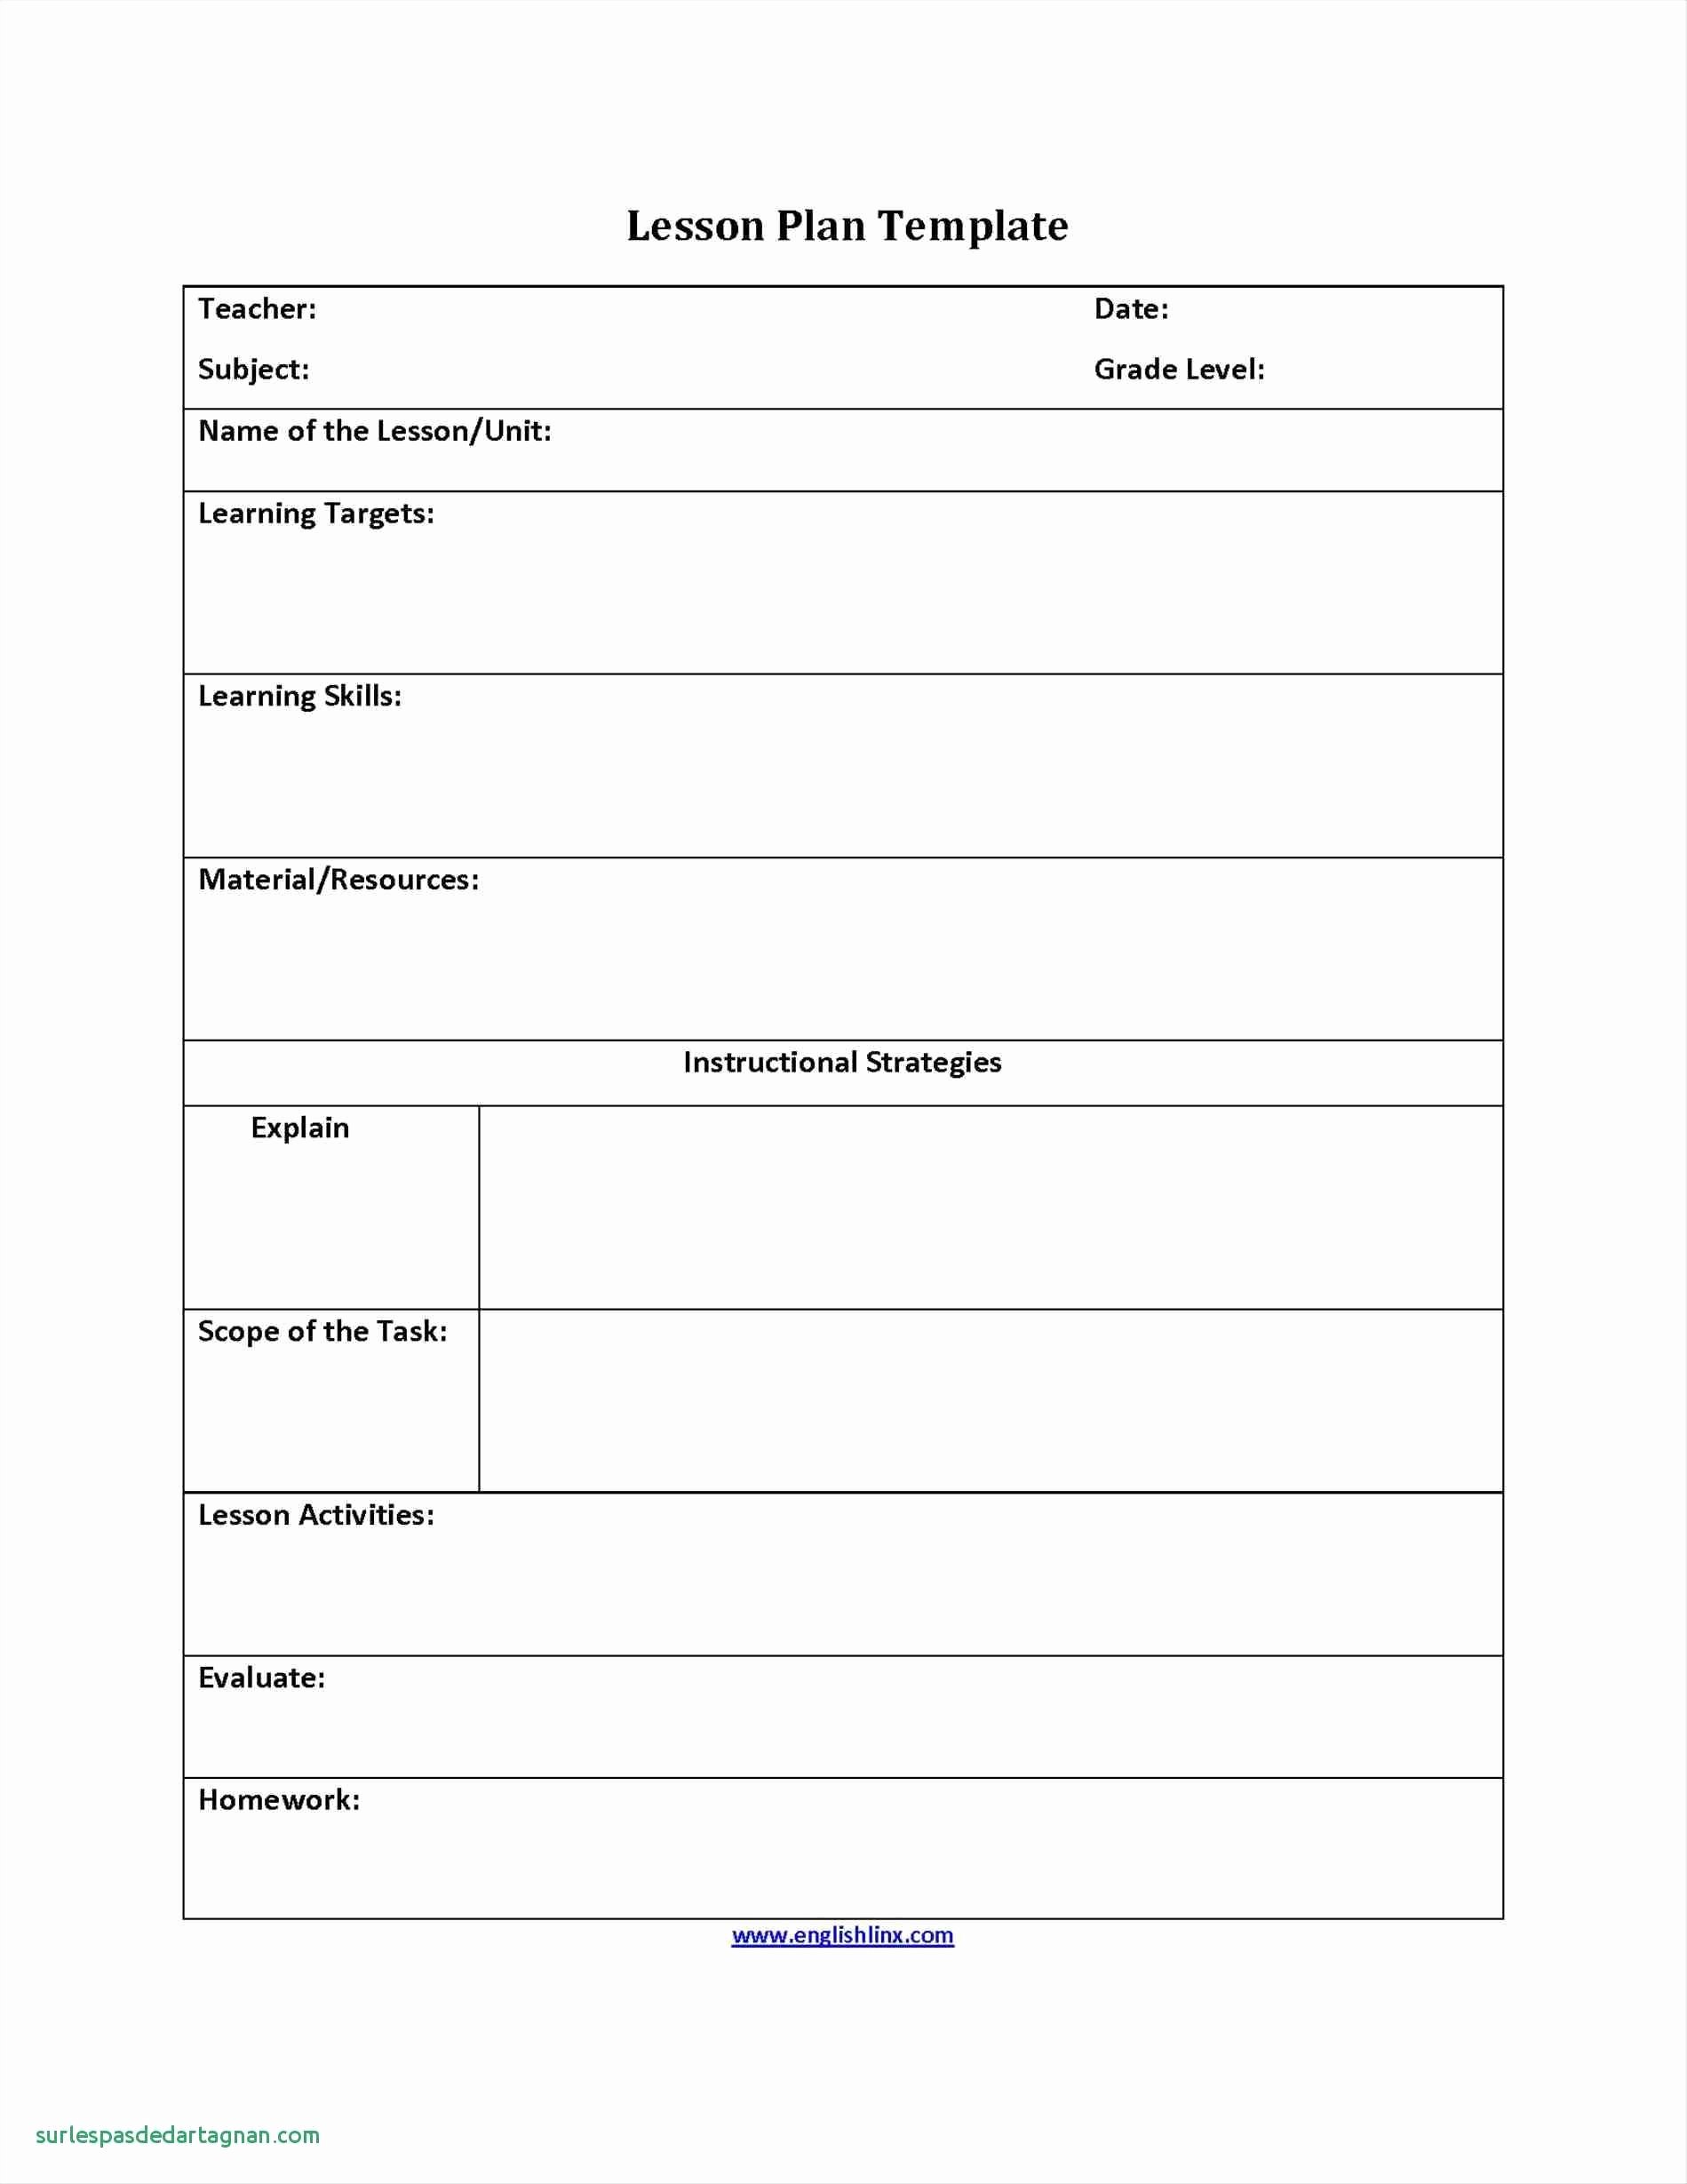 Elementary Music Lesson Plan Template New Elementary Special Education Lesson Plan Templates – How